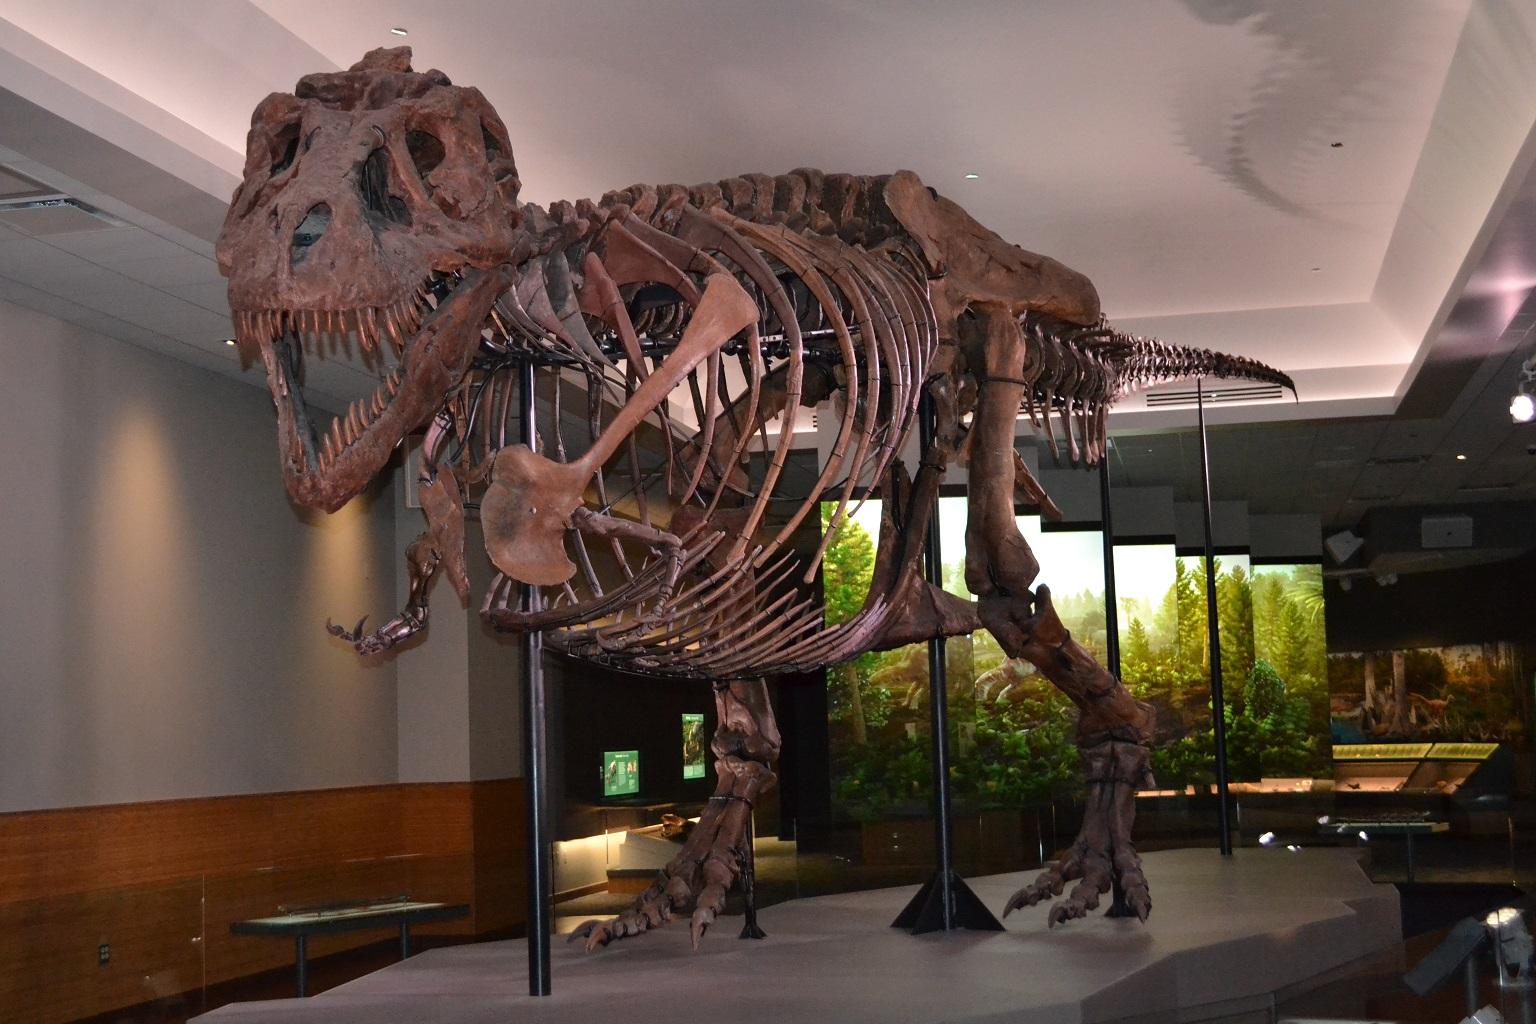 Sue the T. Rex inside a new “private suite” that opened in late 2018 at the Field Museum. (Alex Ruppenthal / WTTW News)